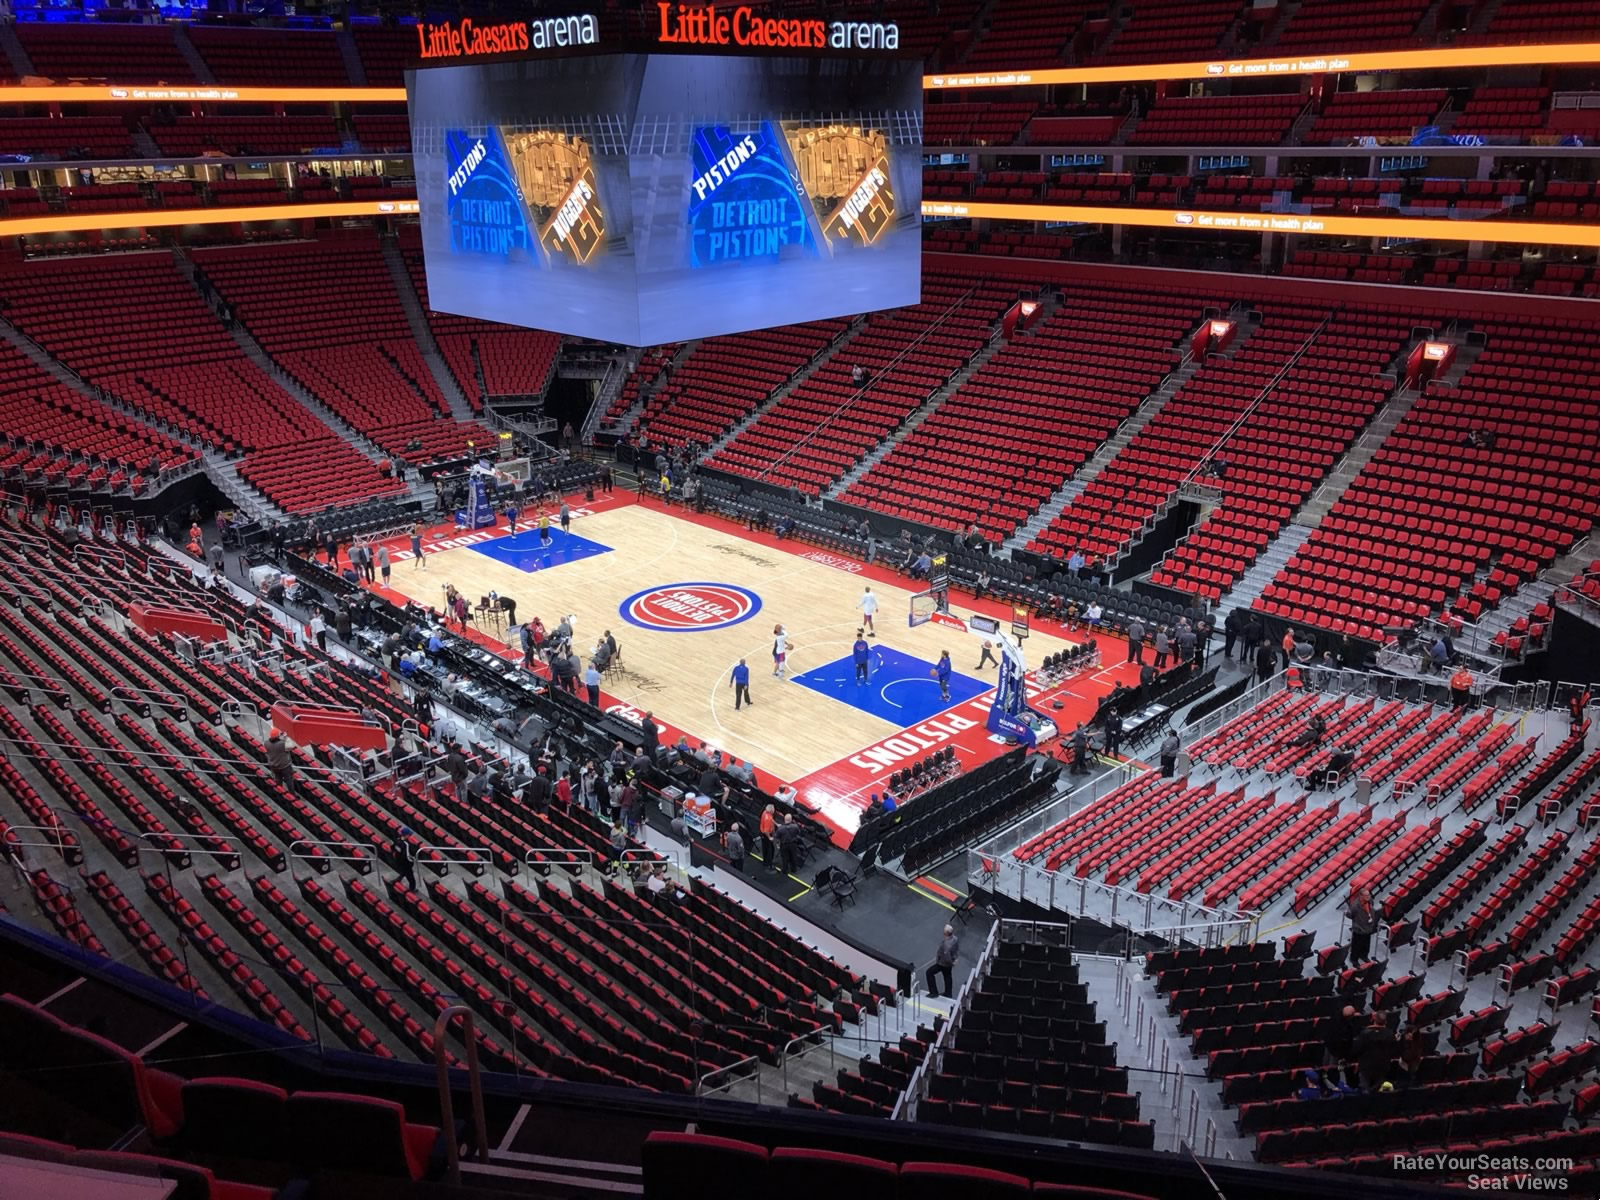 mezzanine 23, row 2 seat view  for basketball - little caesars arena